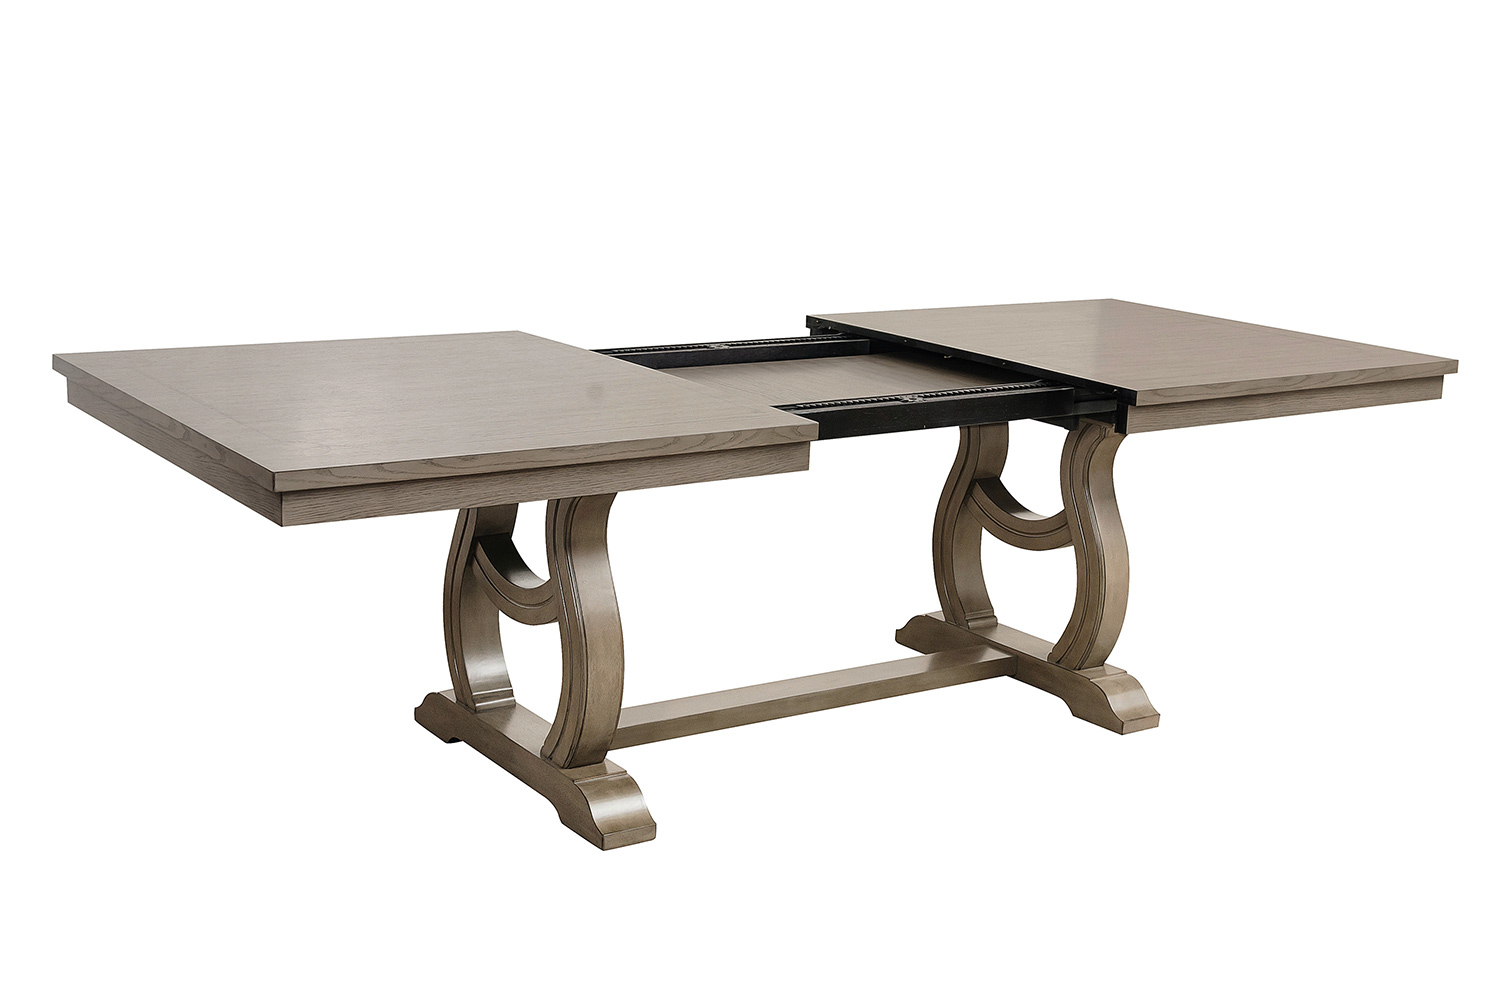 Homelegance Vermillion Dining Table - Bisque